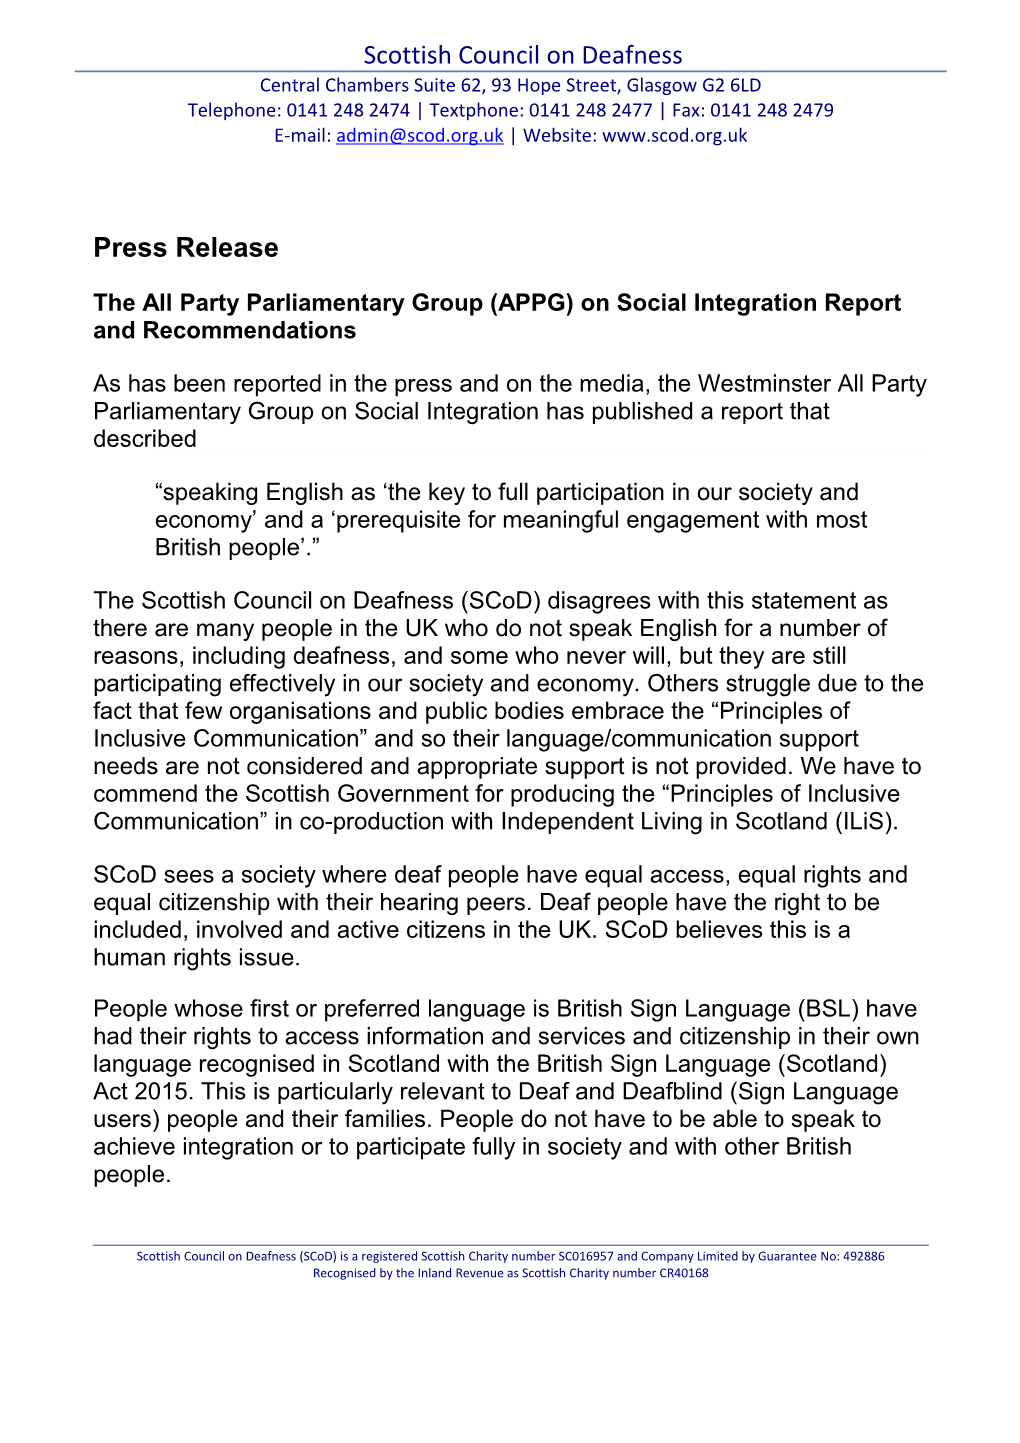 The All Party Parliamentary Group (APPG) on Social Integration Report and Recommendations